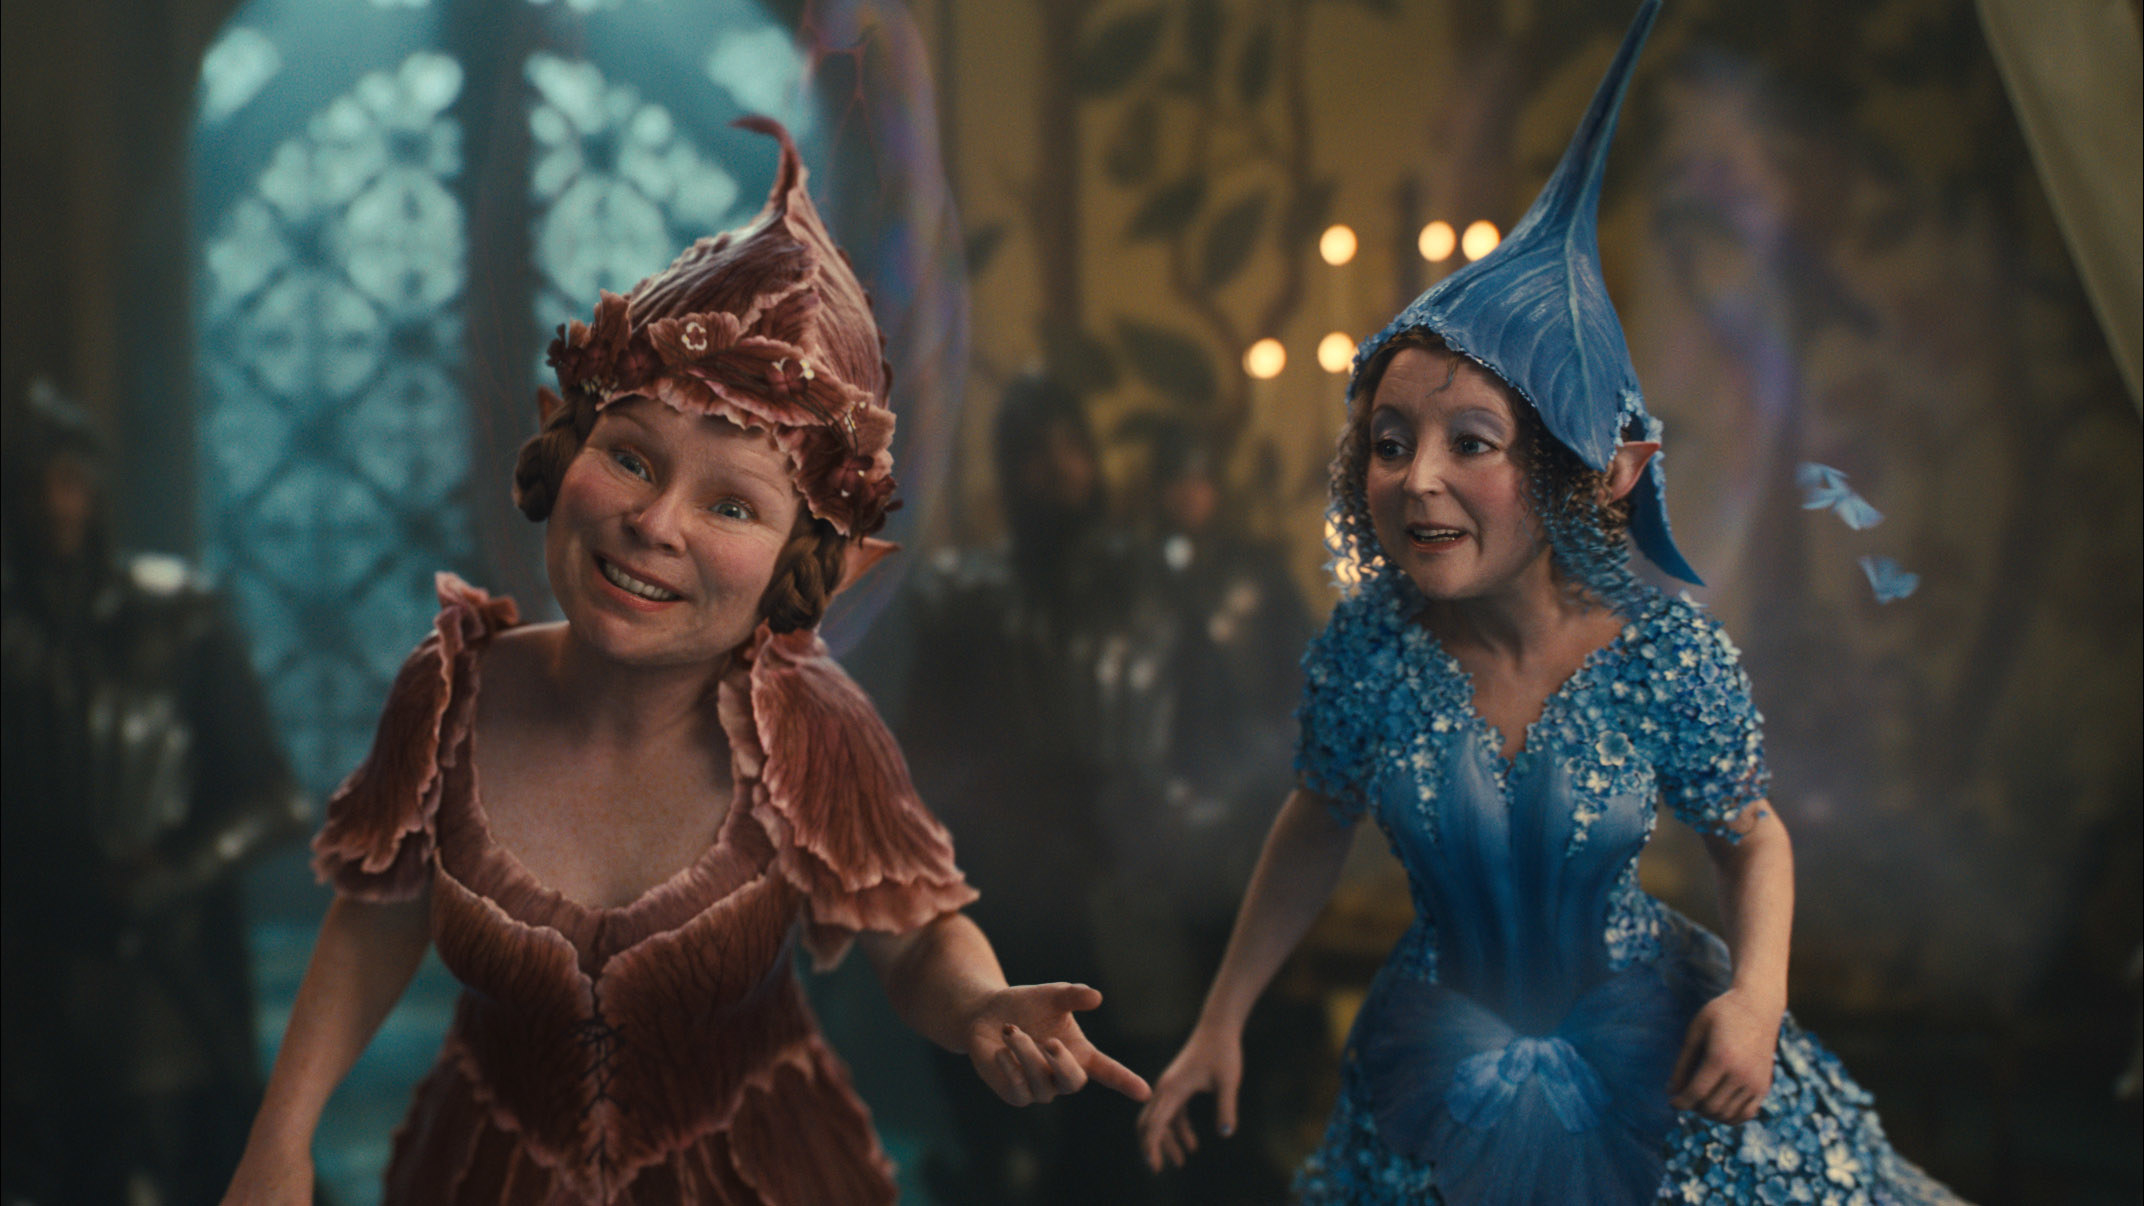 Imelda Staunton and Lesley Manville in Maleficent